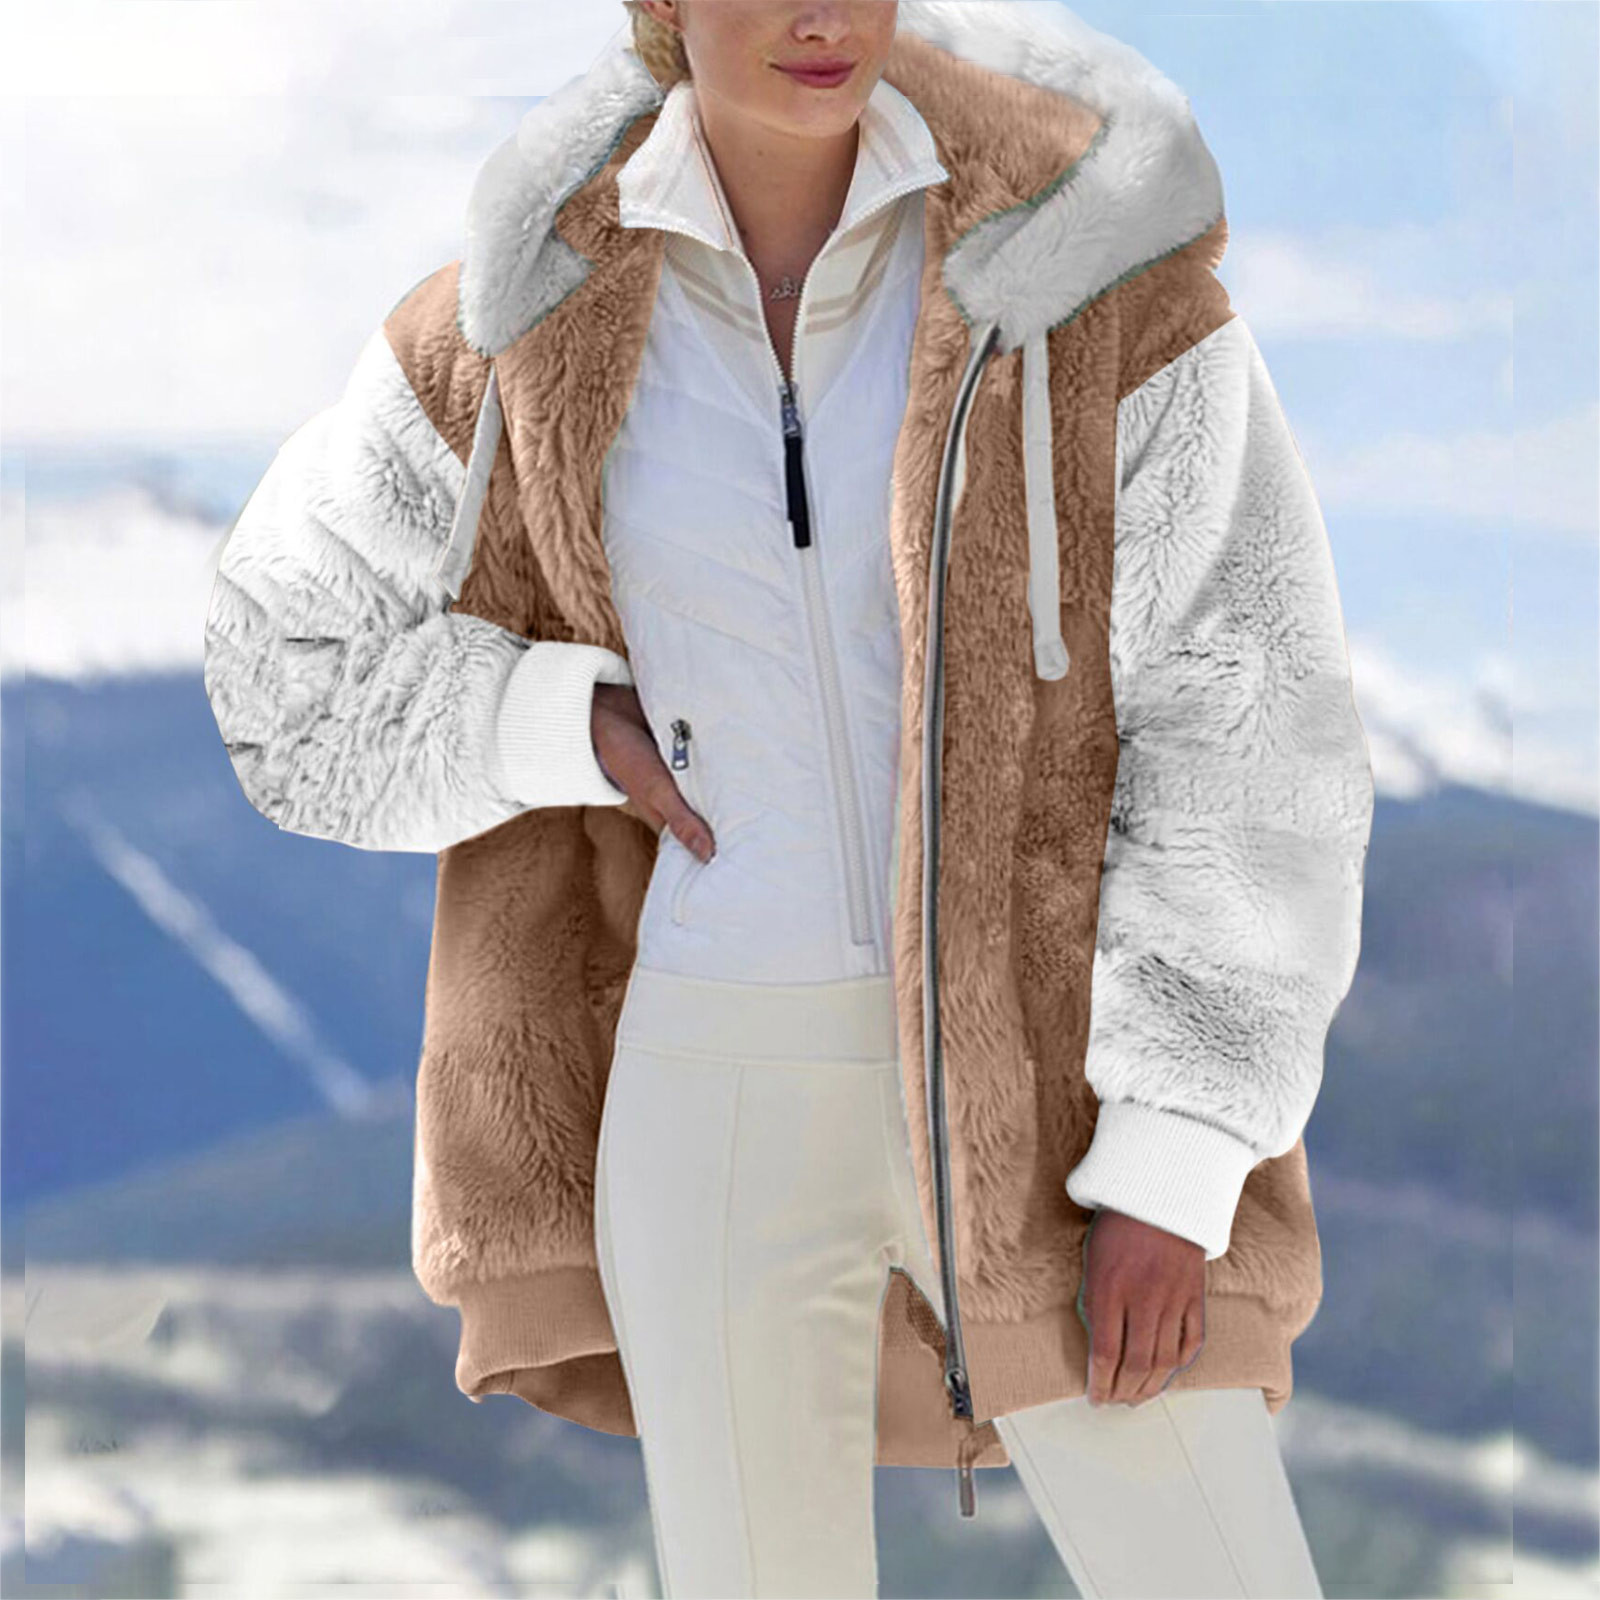 Winter Coat Womens Fashion Plus Size Extreme Cold Weather Outwear Thicken Furry Lined Thermal Down Jacket Clothing - image 2 of 6